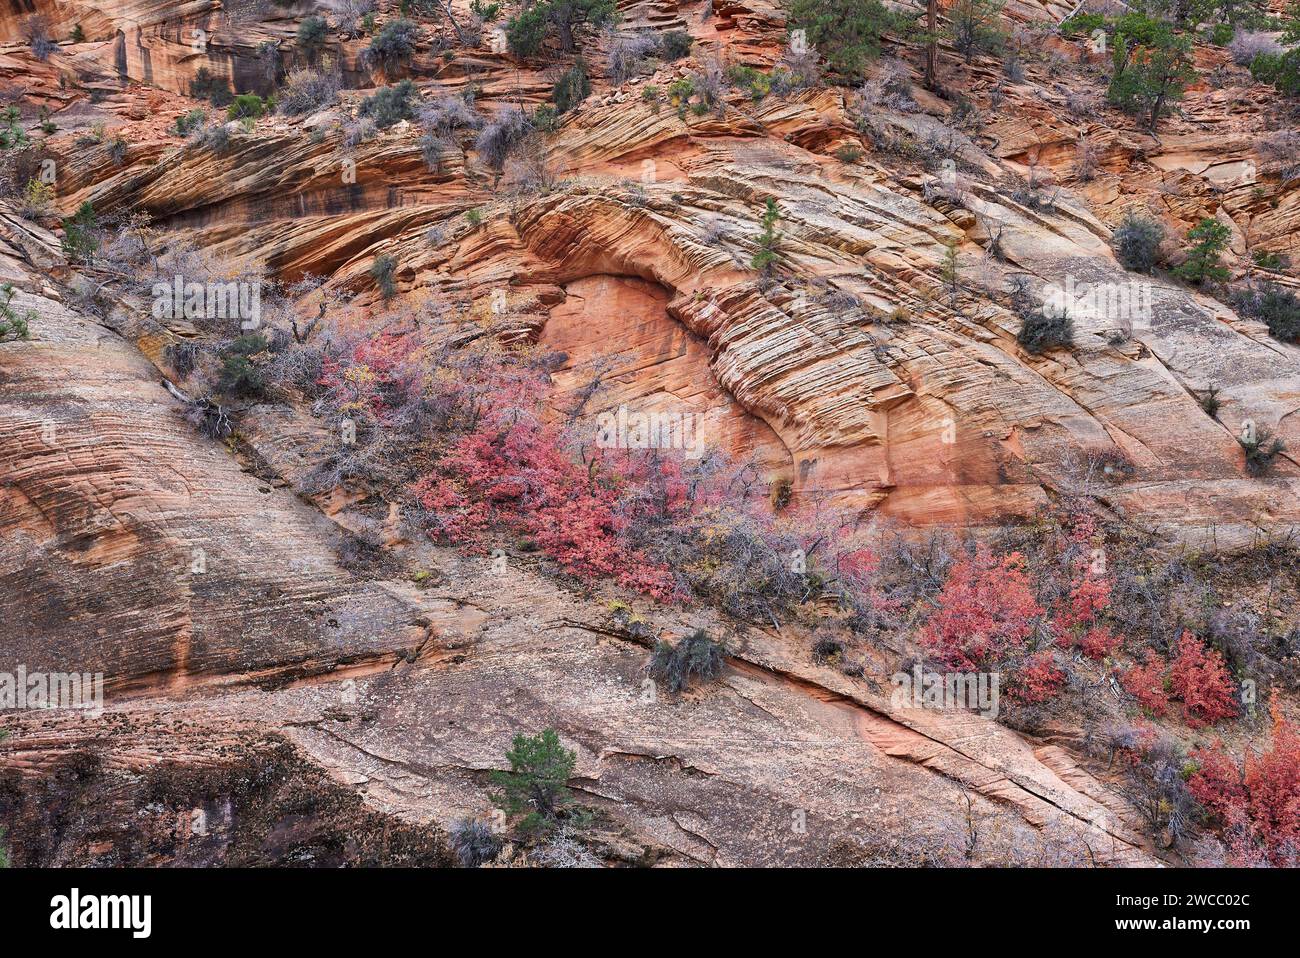 Red and green shrubs growing in a rock face. Located in zion national park, this beautiful display of colors stands vertically with visible rock layer Stock Photo